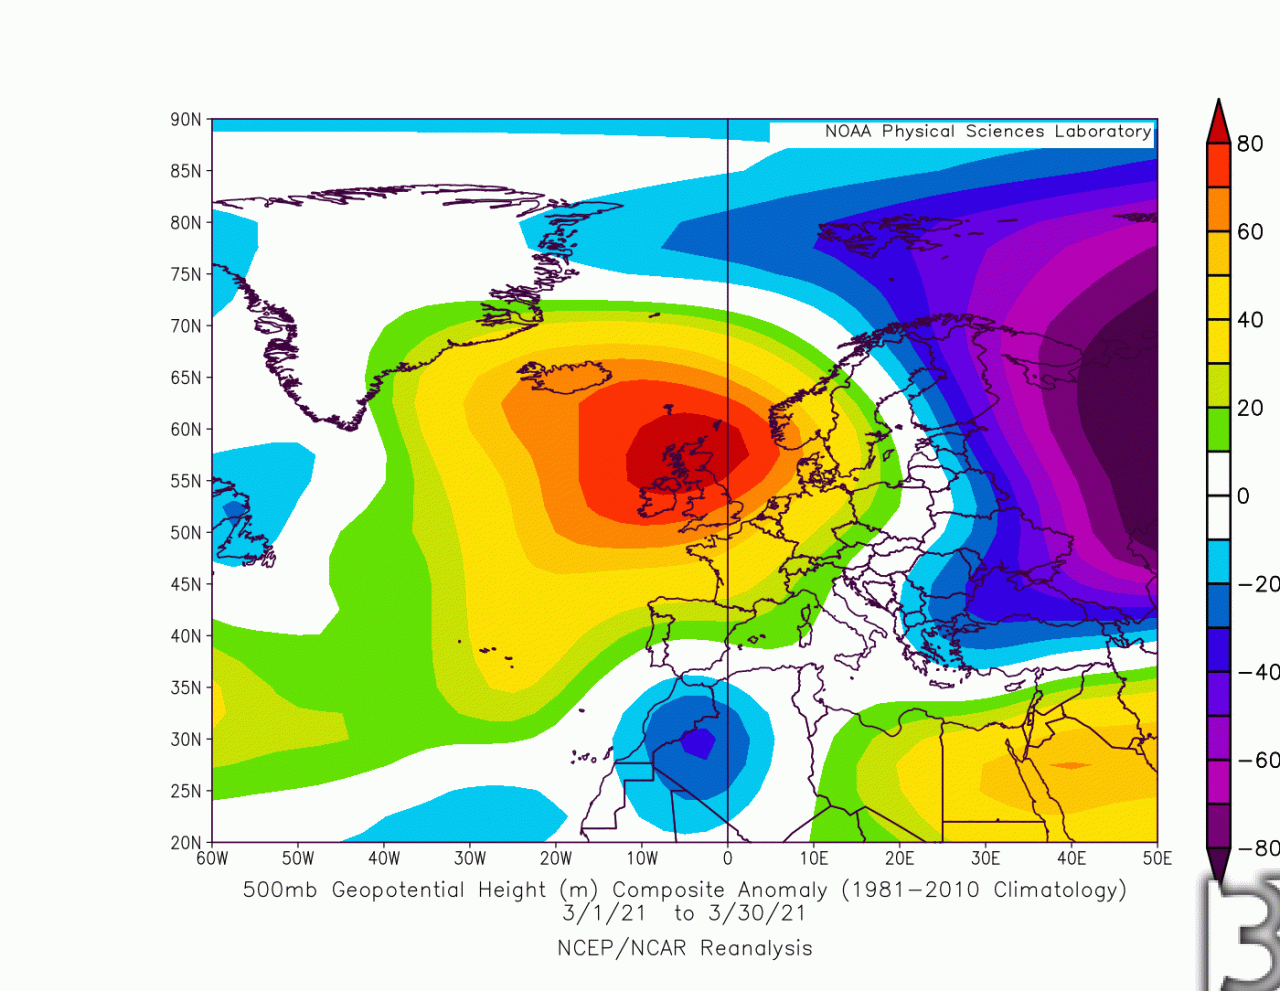 anomalie geopotenziale a 500 hPa in marzo, reanalisi